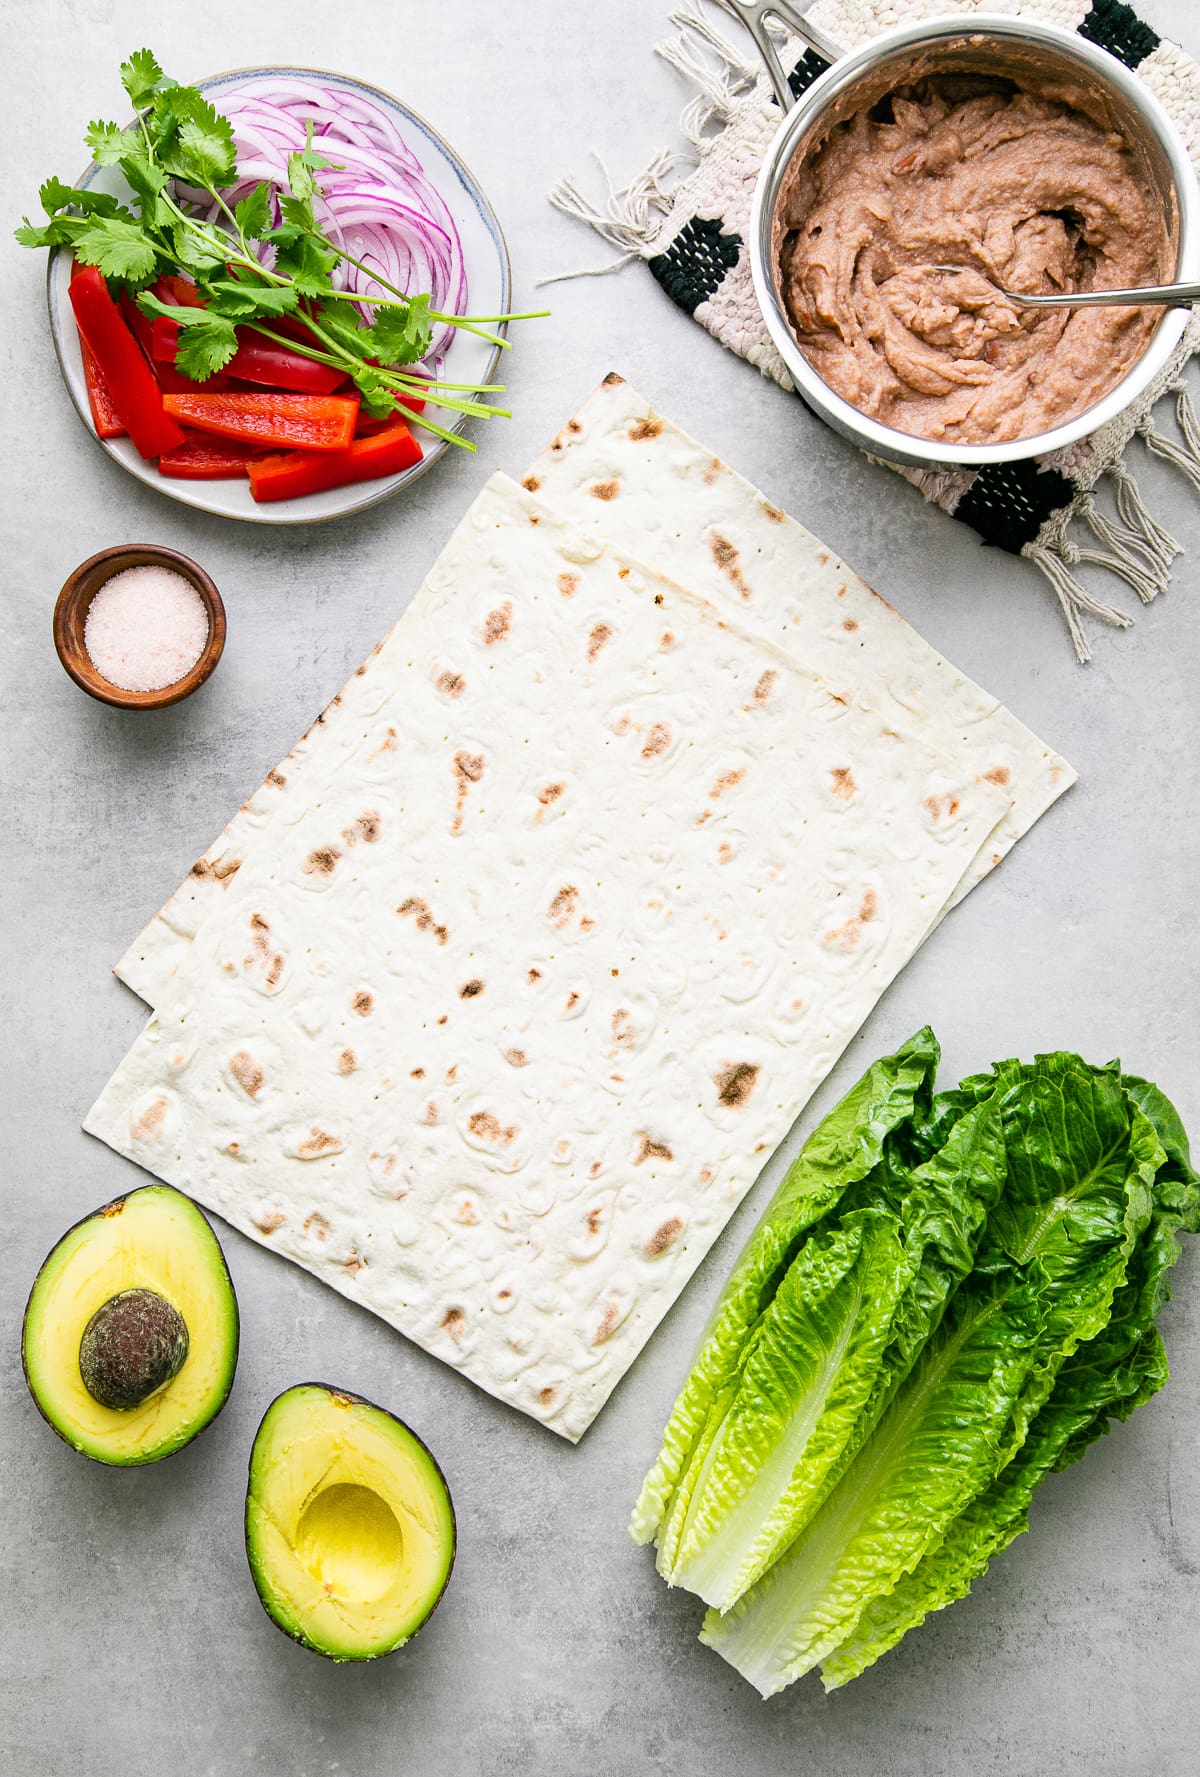 top down view of ingredients used to make refried bean avocado lavash wraps.